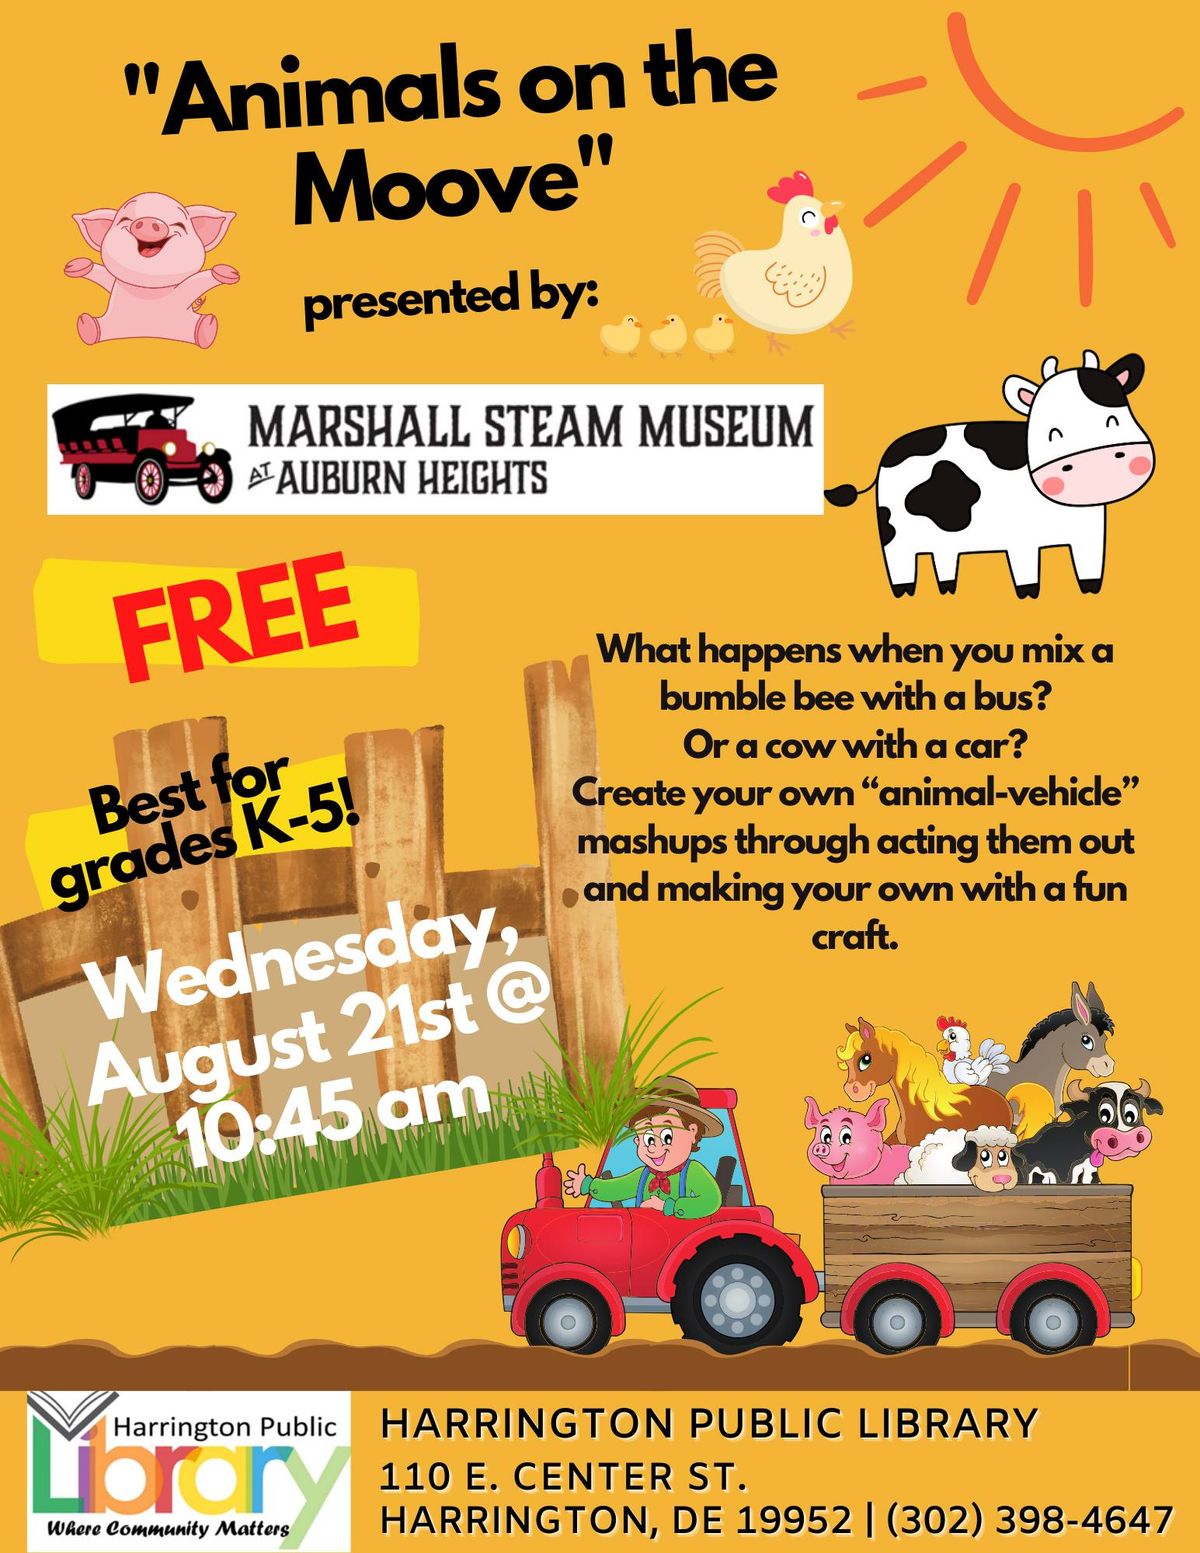 Animals on the Moove! \ud83d\udc04\ud83c\udfce\ufe0f\ud83d\udc1d[presented by Marshall Steam Museum at Auburn Heights] 